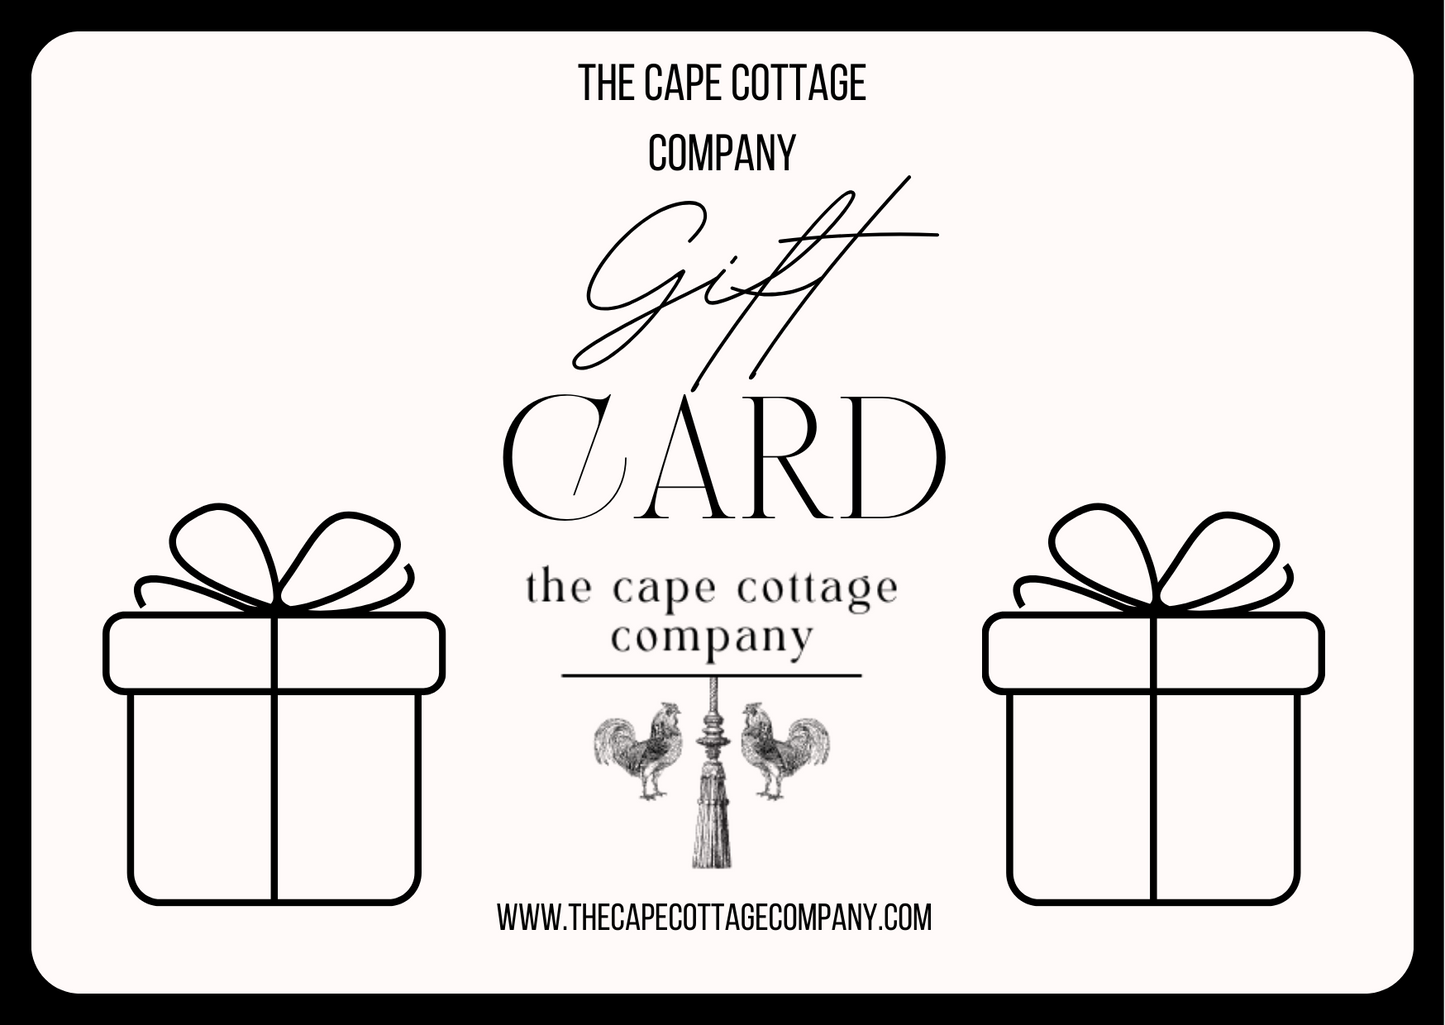 ~GIFT CARDS~ Now available from The Cape Cottage Company!